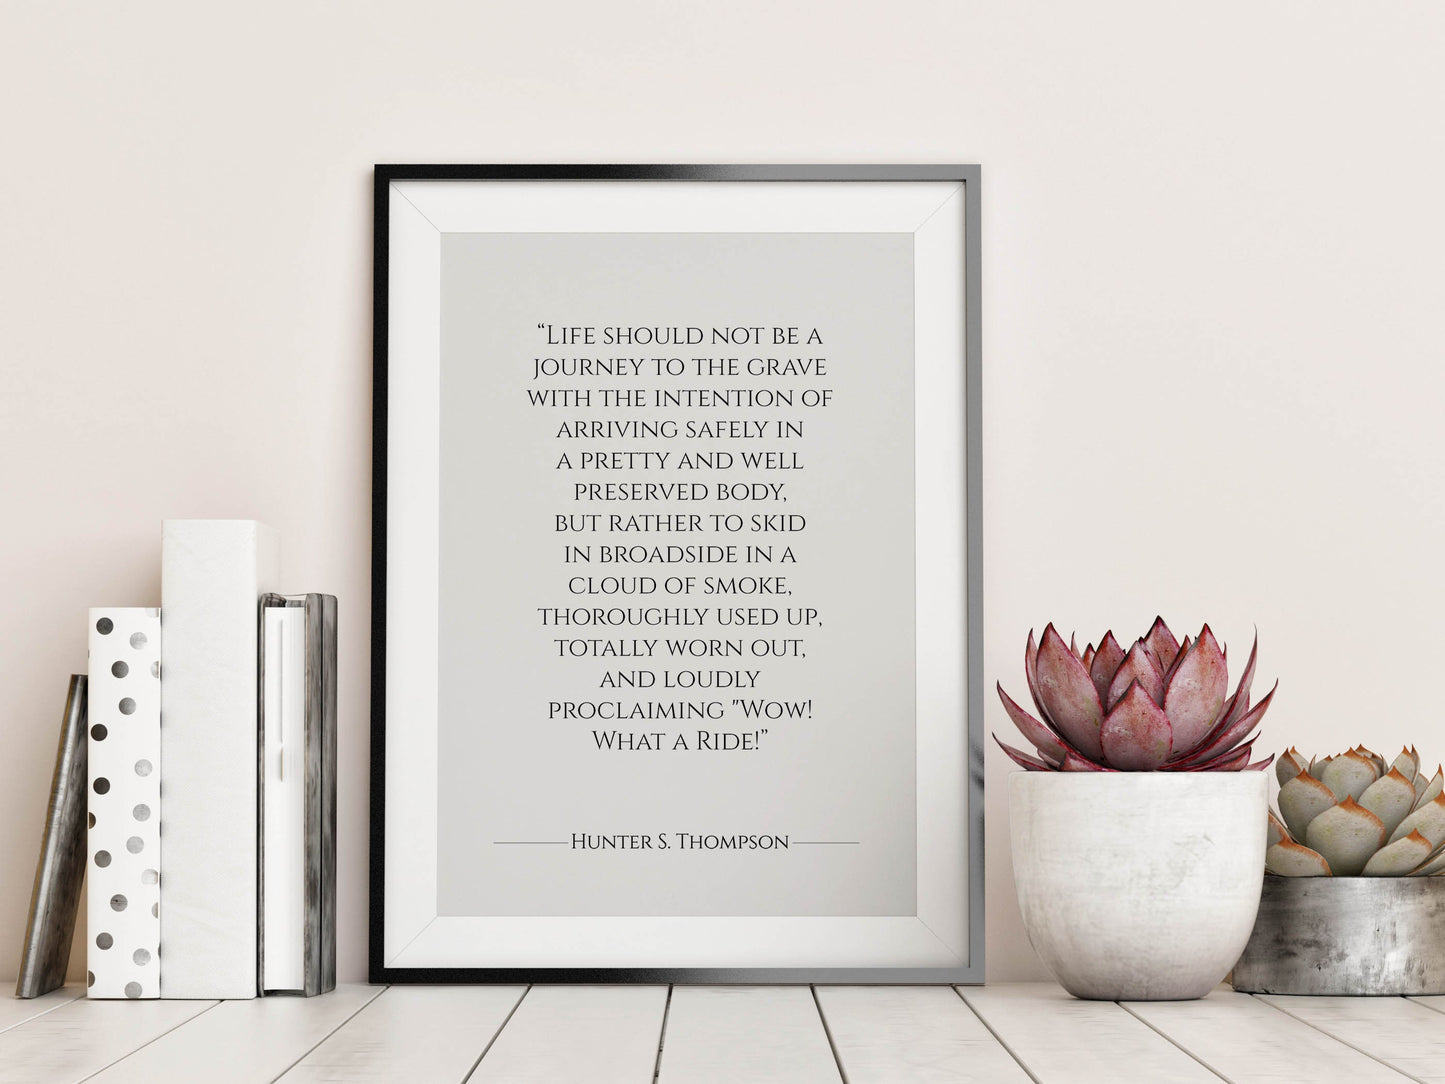 Hunter S. Thompson Quote, Print 'life should not be a journey to the grave' Poster art print framed - Adventure Quote